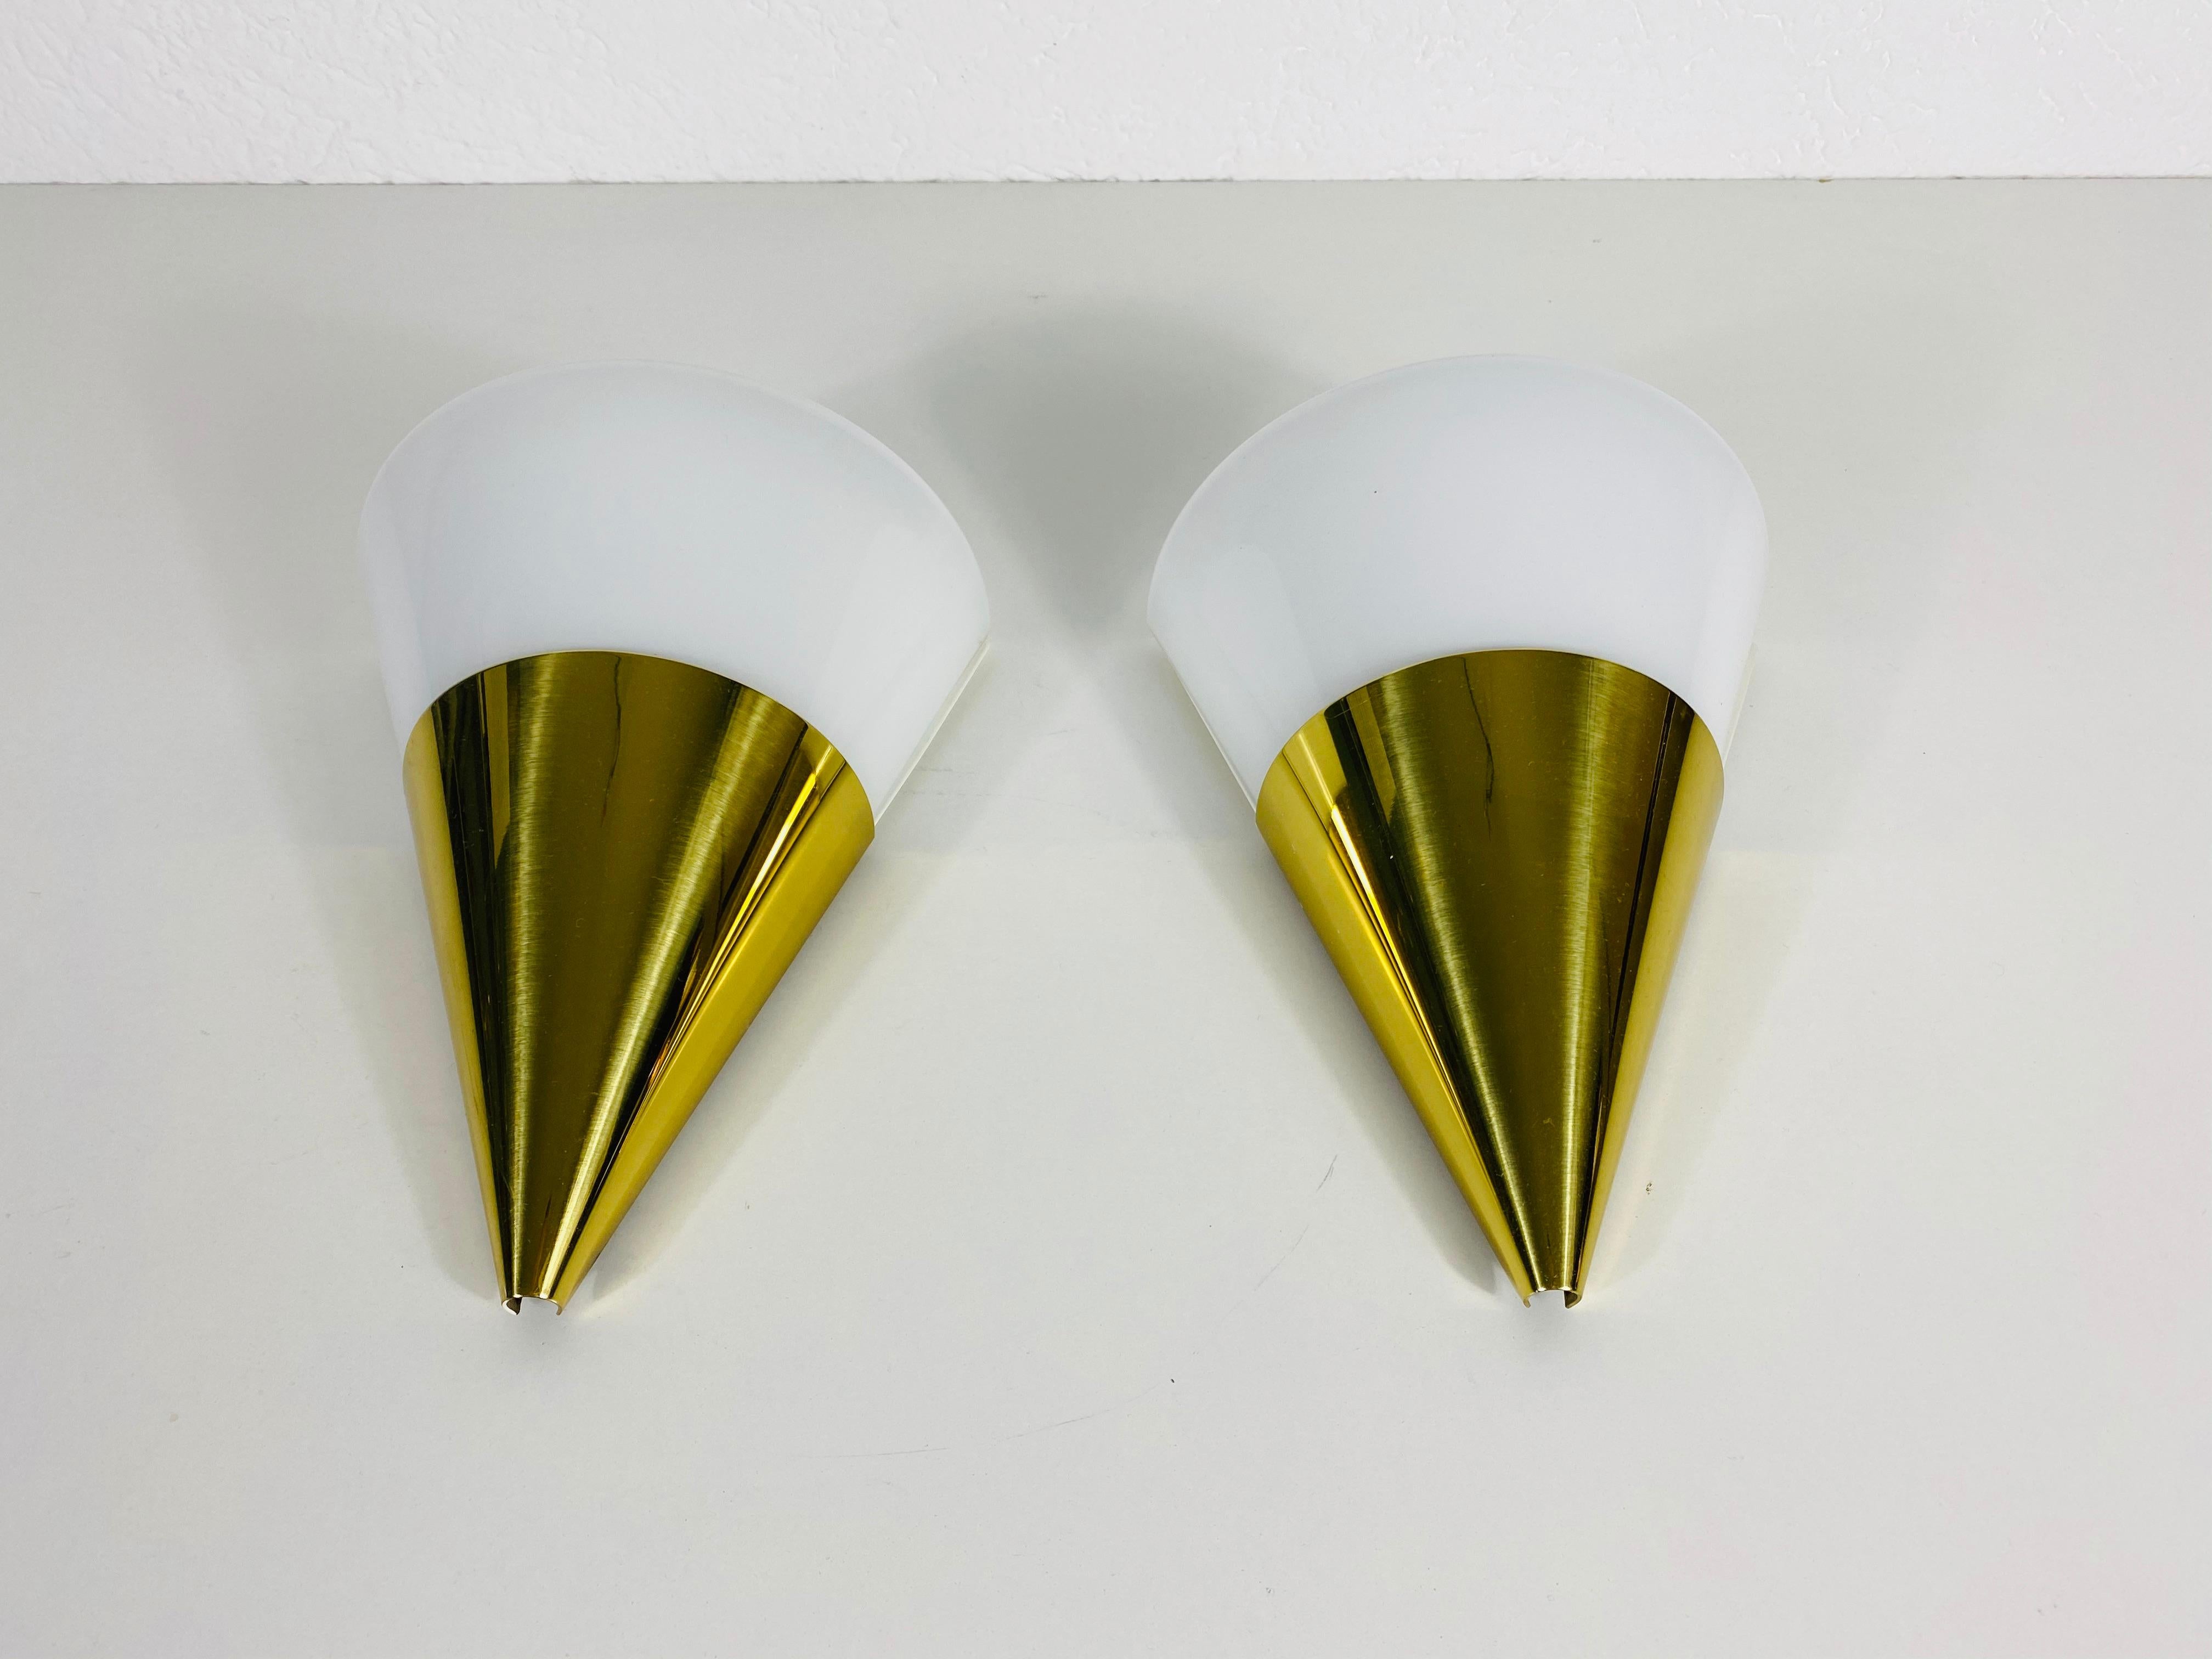 A beautiful pair of modern wall lamps by Glashütte Limburg made in Germany in the 1980s. They have a cone shape and are made of brass and Opaline glass. The back is made of metal.

The lightings require E14 light bulbs and work with both 120V and